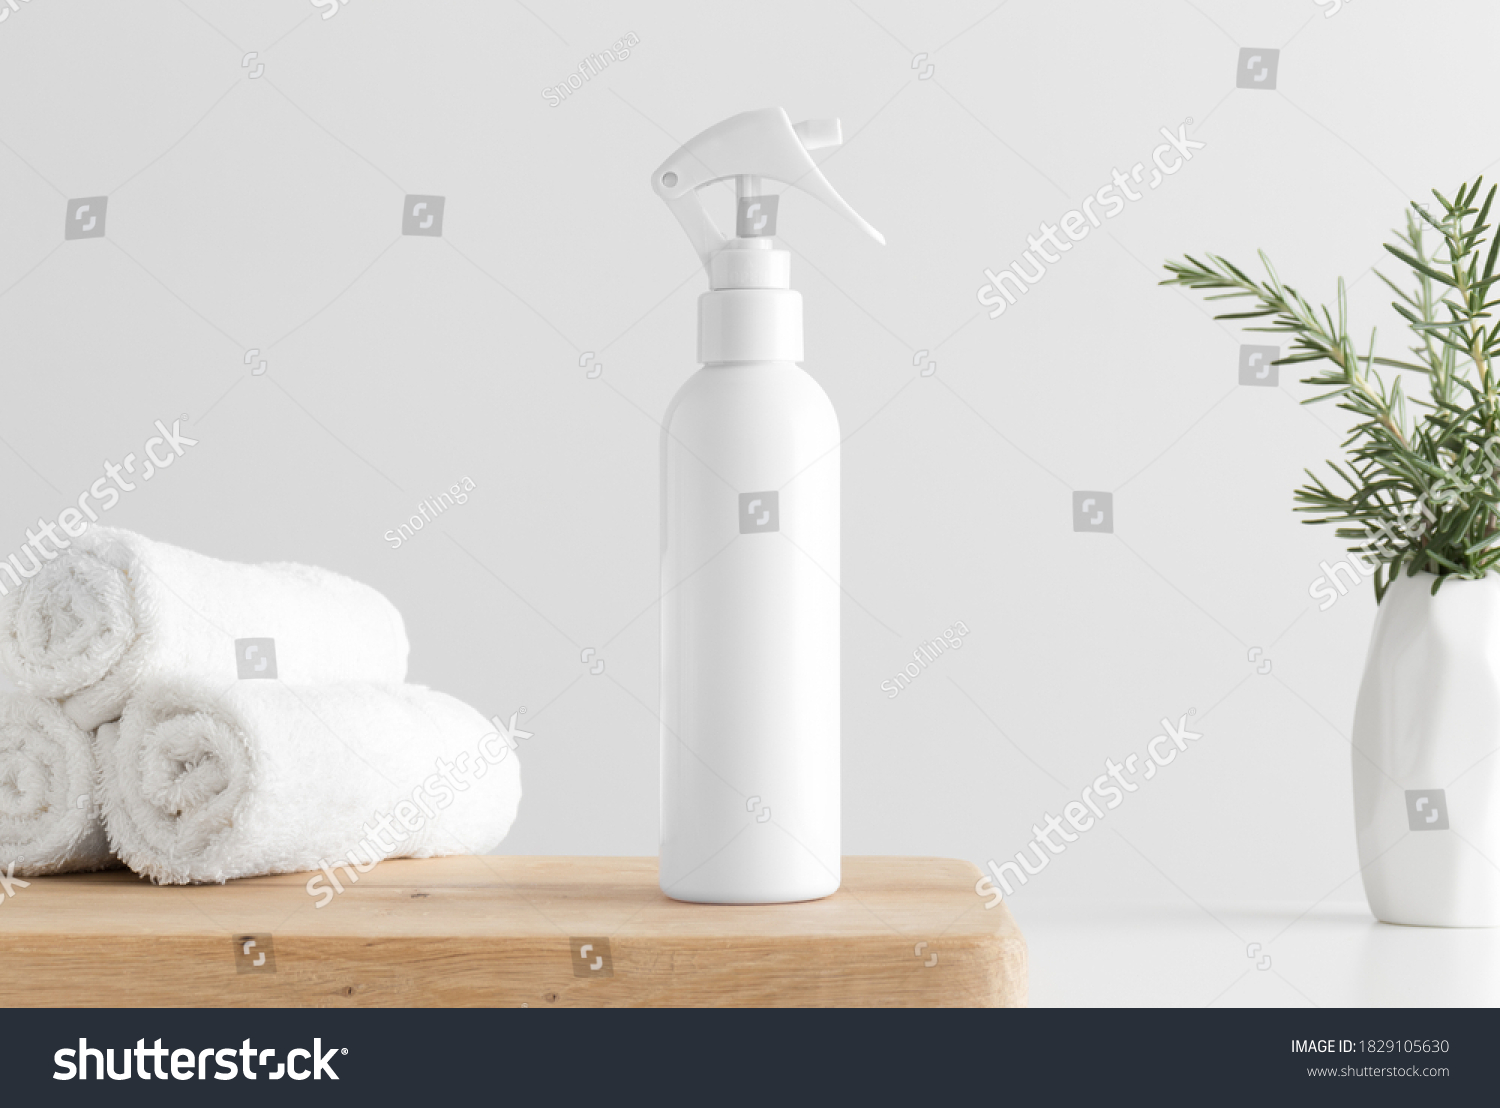 White cosmetic trigger sprayer bottle mockup with towels and a rosemary on a wooden table. #1829105630